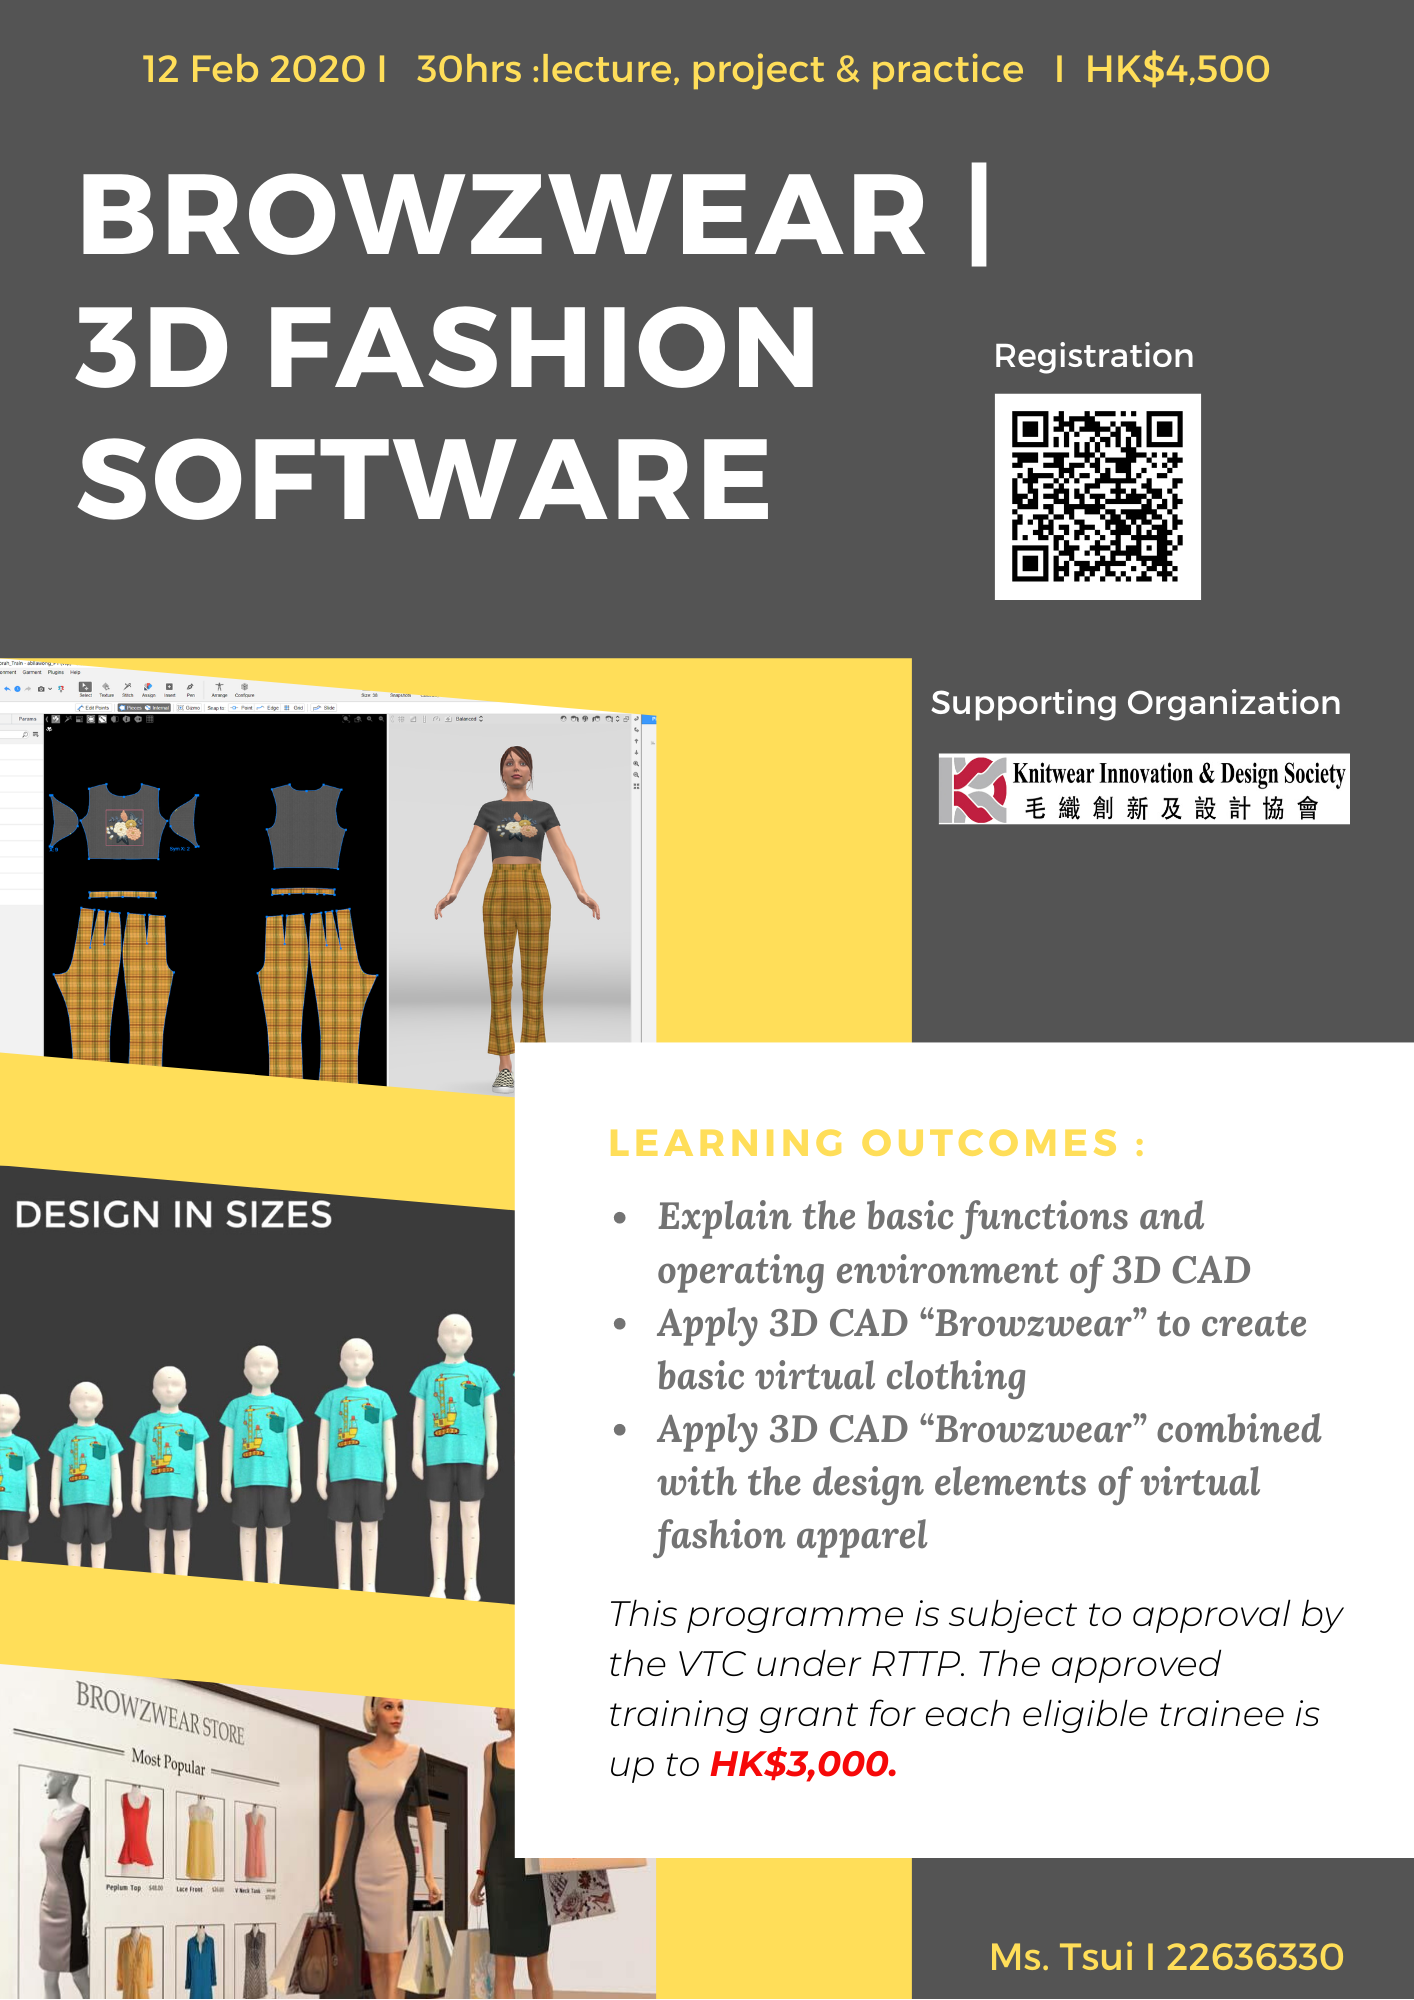 New course: Browzwear | 3D Fashion Software